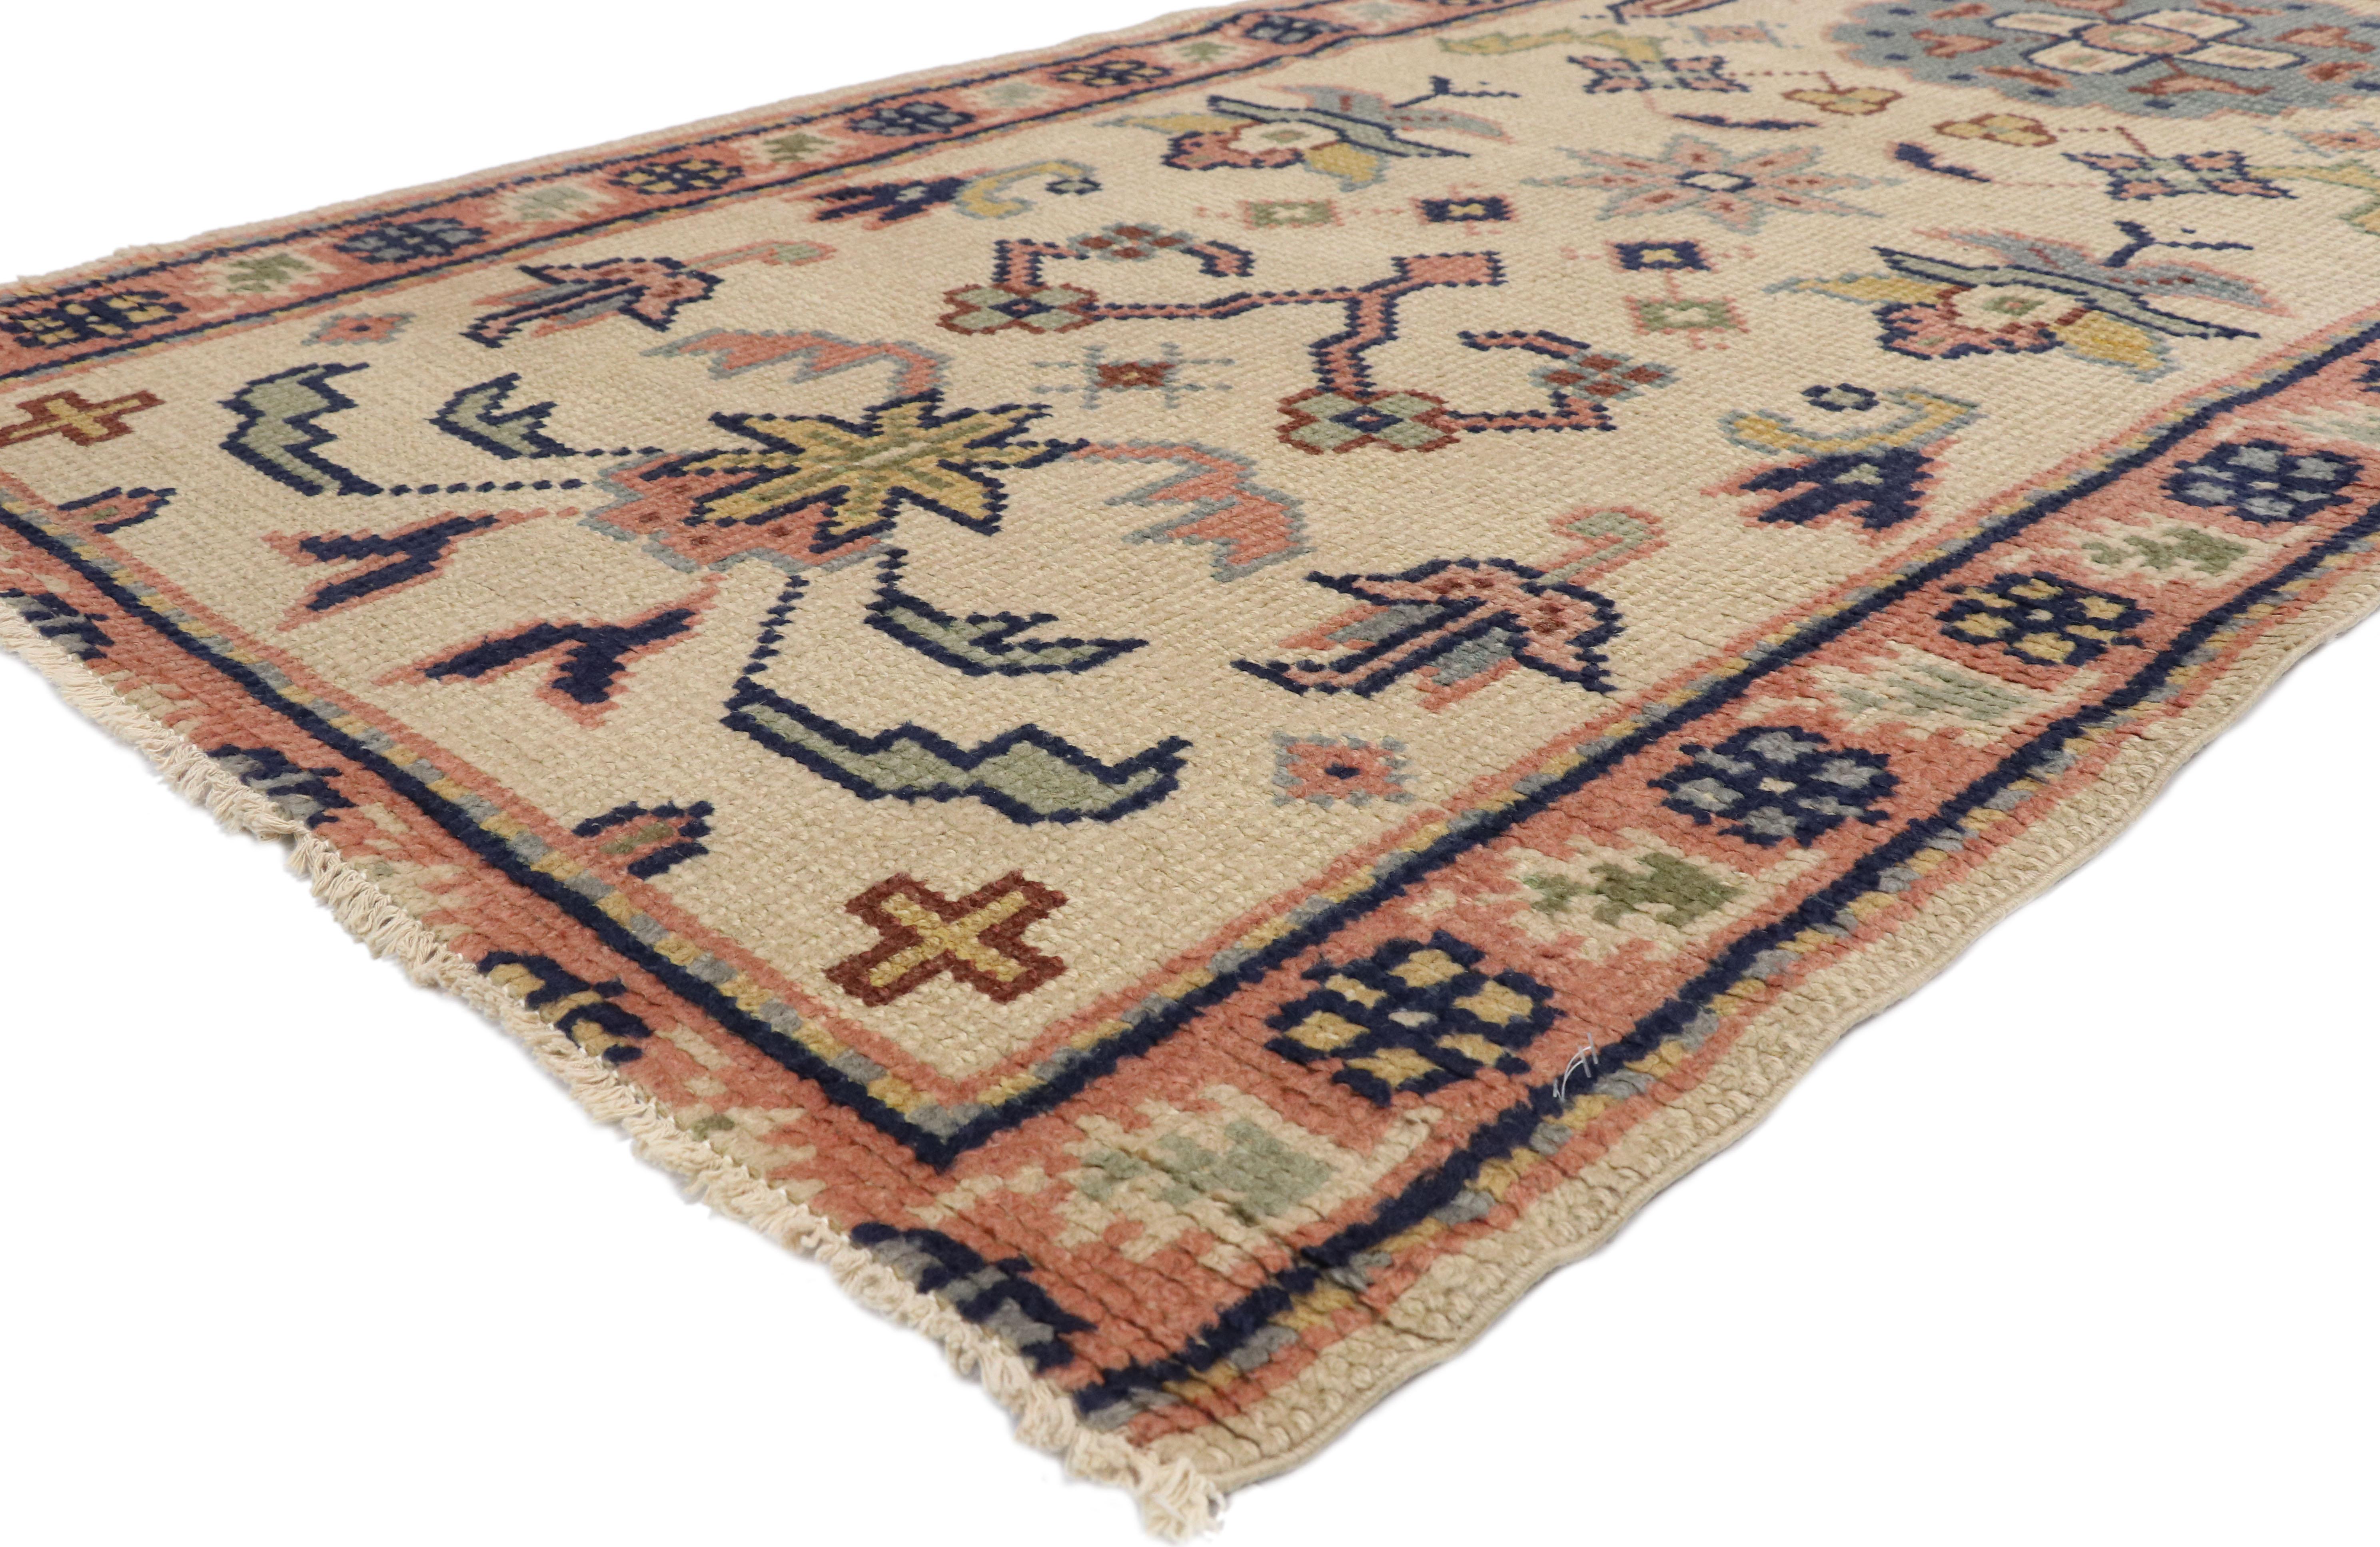 71674 vintage Turkish Oushak runner with European cottage Georgian style, hallway runner. With an elaborate design and pastel colors, this hand knotted wool vintage Turkish Oushak runner beautifully embodies European cottage and Georgian style. It